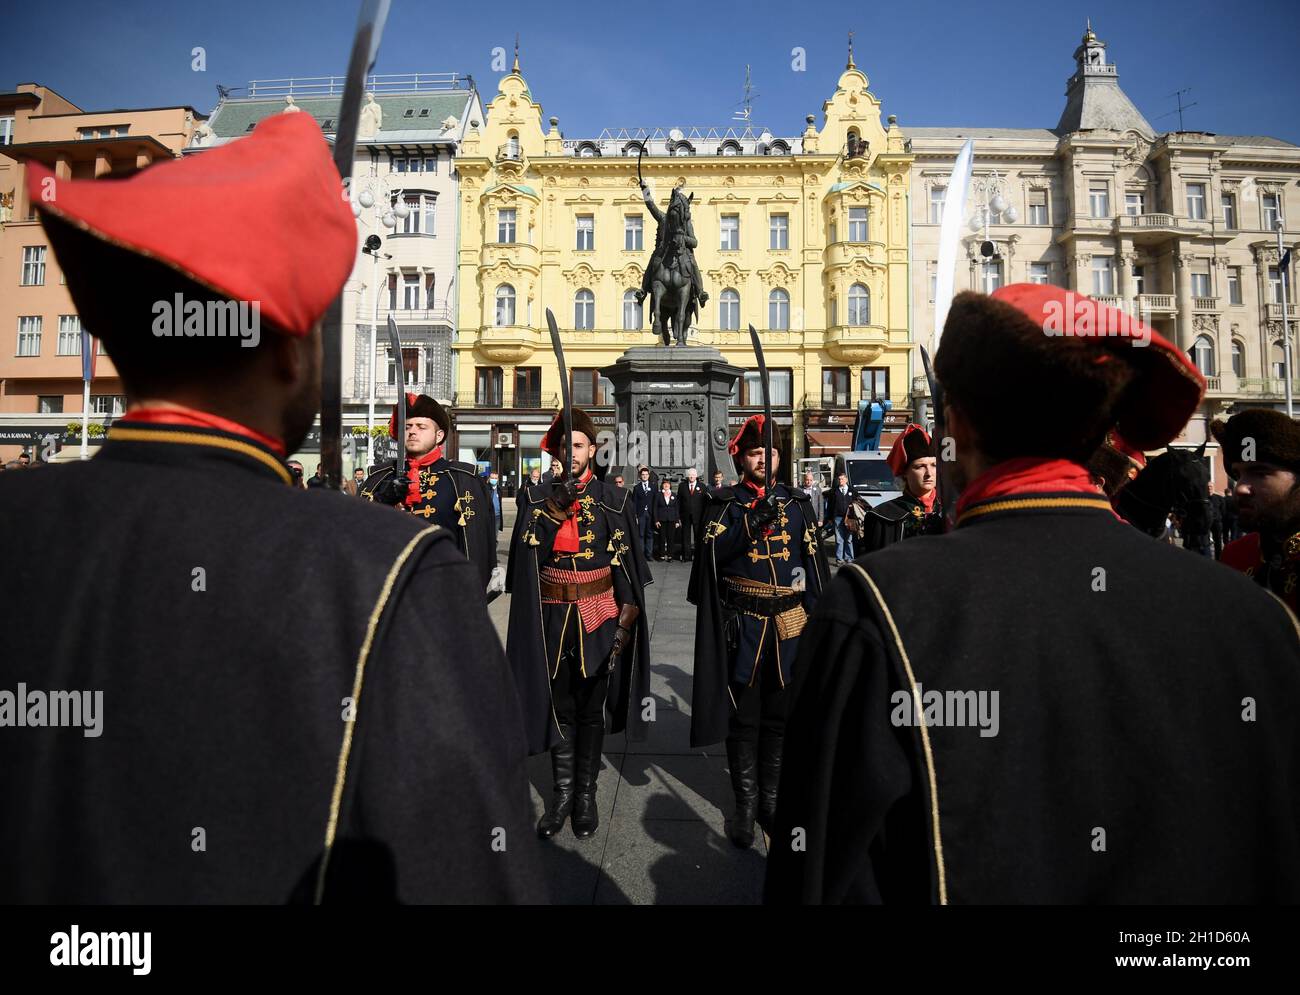 (211018) -- ZAGREB, Oct. 18, 2021 (Xinhua) -- Soldiers in traditional military uniforms perform in the Cravat Day celebration in Zagreb, Croatia, on Oct. 18, 2021. Croatians celebrate World Cravat Day on Oct. 18 every year. The Cravat, symbol of culture and style, originated from the red neck scarves worn by Croatian soldiers serving in France in the 17th century. (Marko Lukunic/Pixsell via Xinhua) Stock Photo